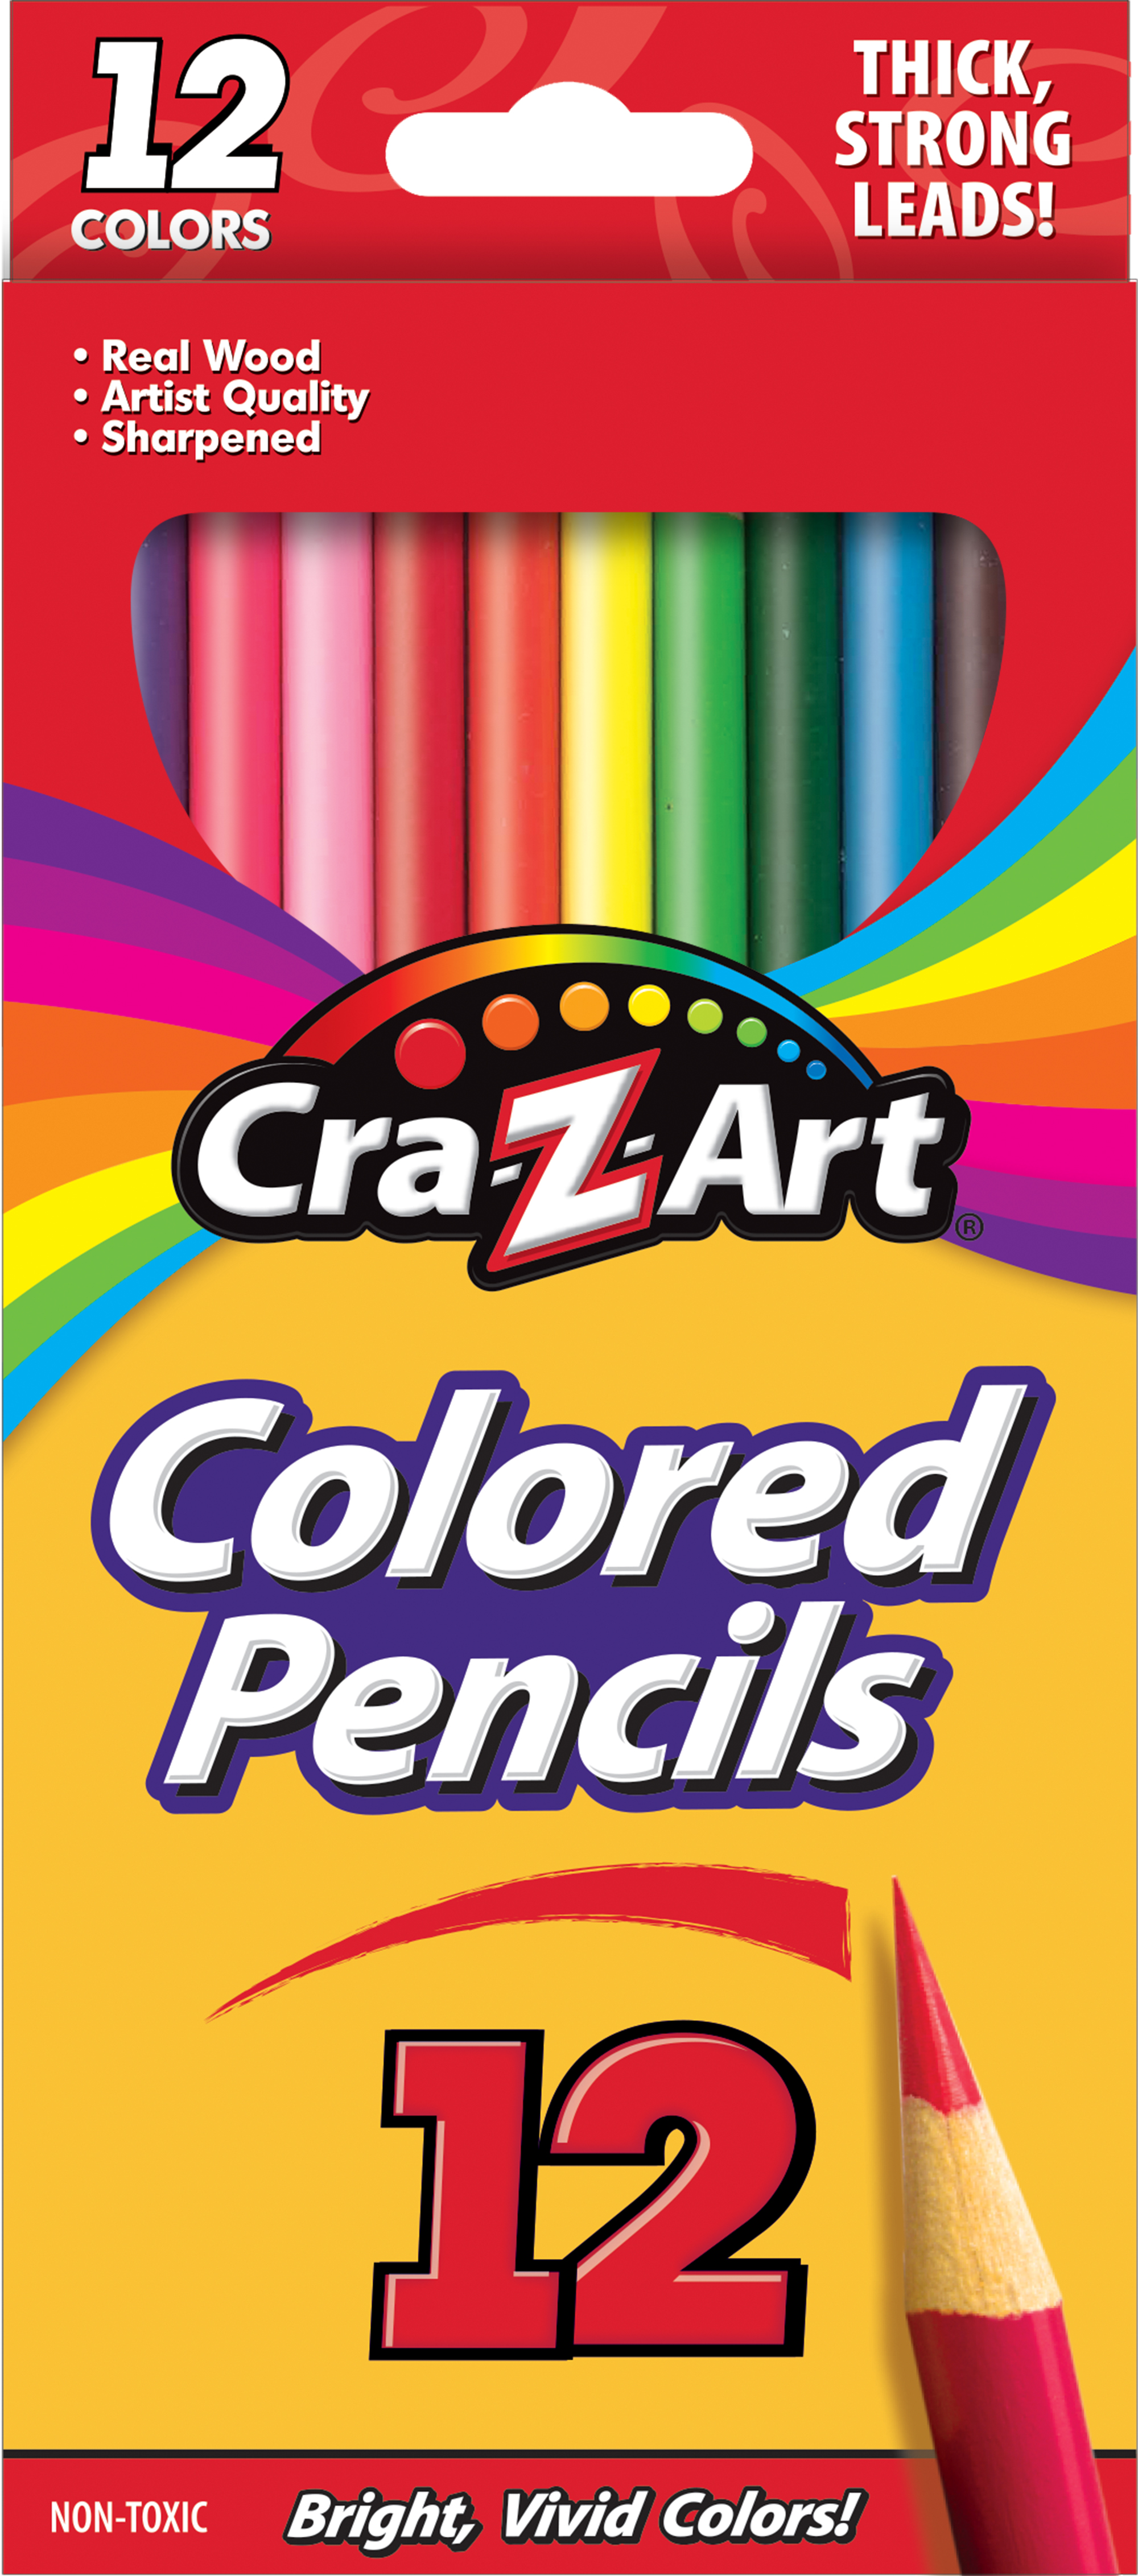 Cra-Z-Art Colored Pencils, 12 Count, Beginner Child to Adult, Back to School Supplies - image 1 of 11